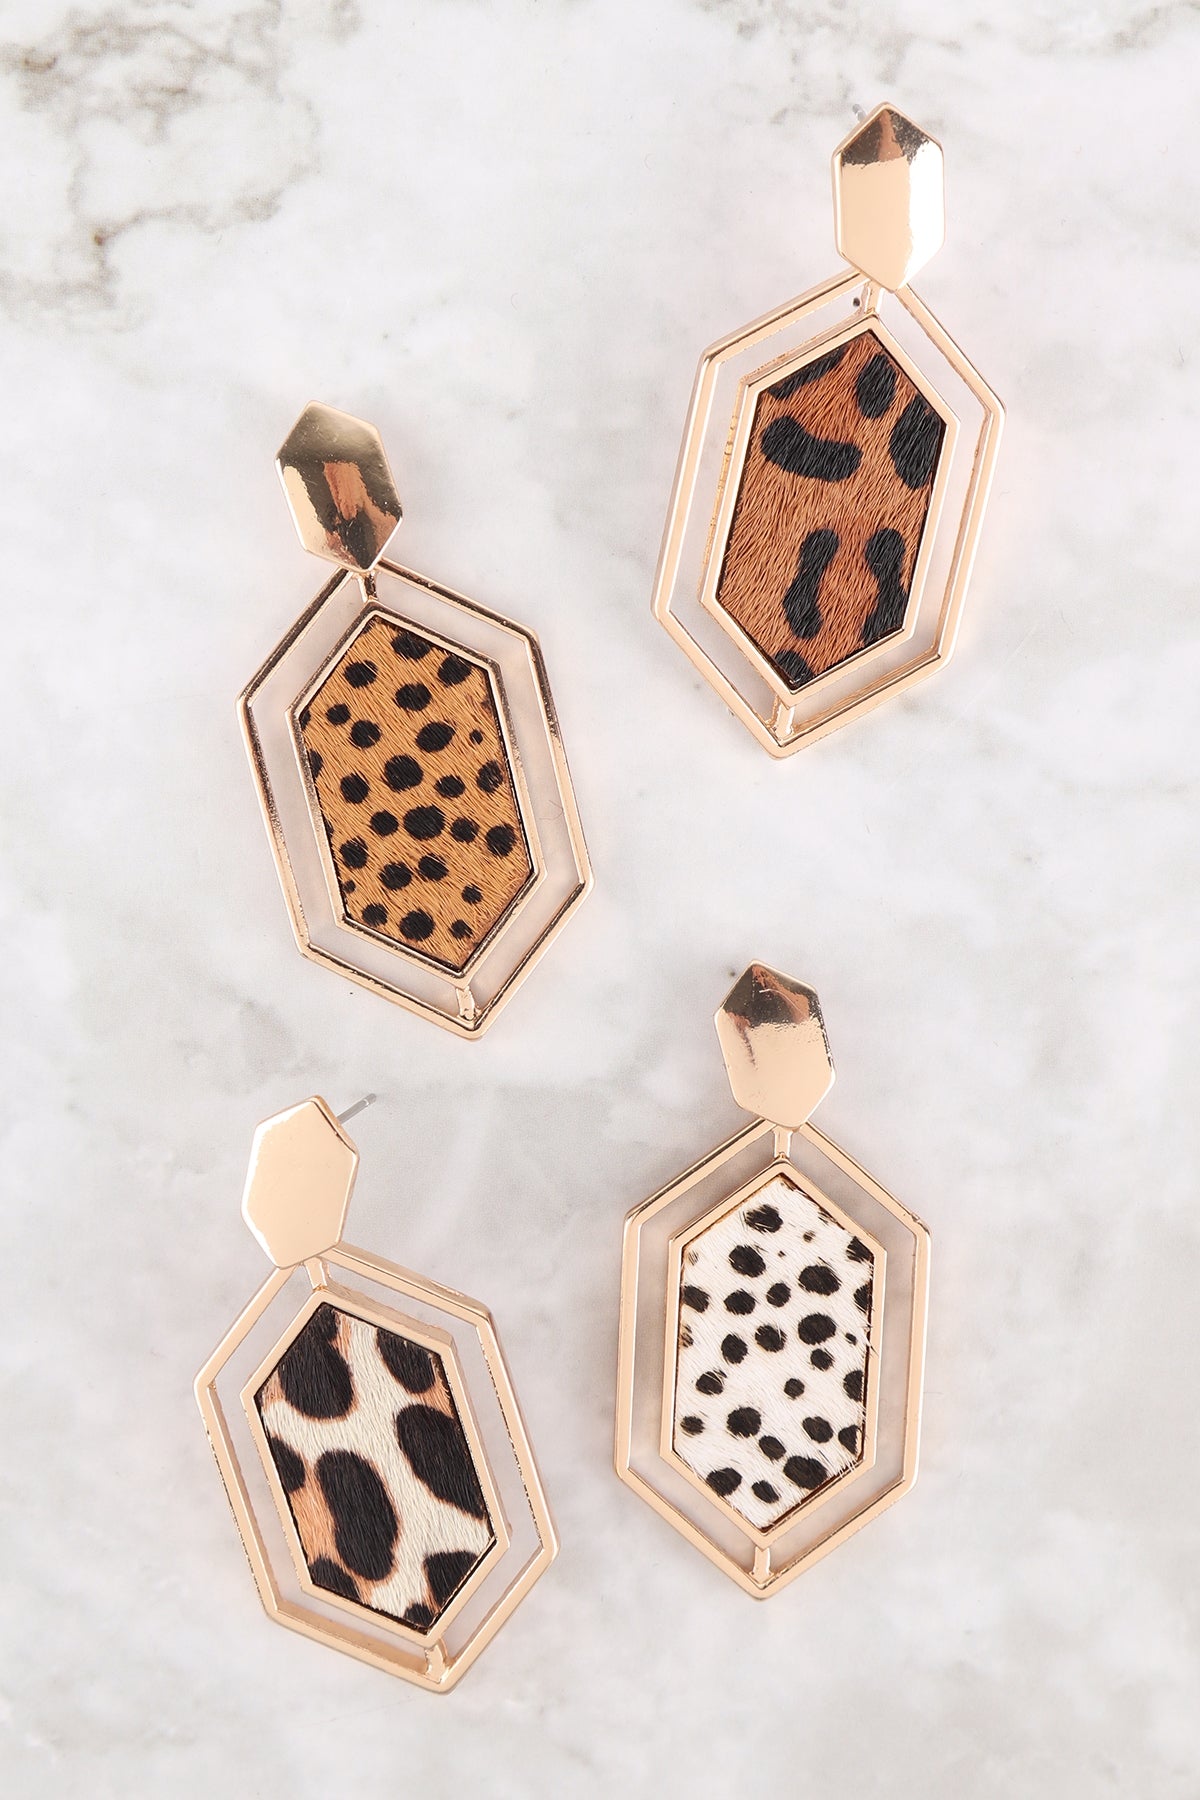 HEXAGON SHAPE REAL CALF HAIR LEATHER POST EARRINGS (NOW $1.50 ONLY!)